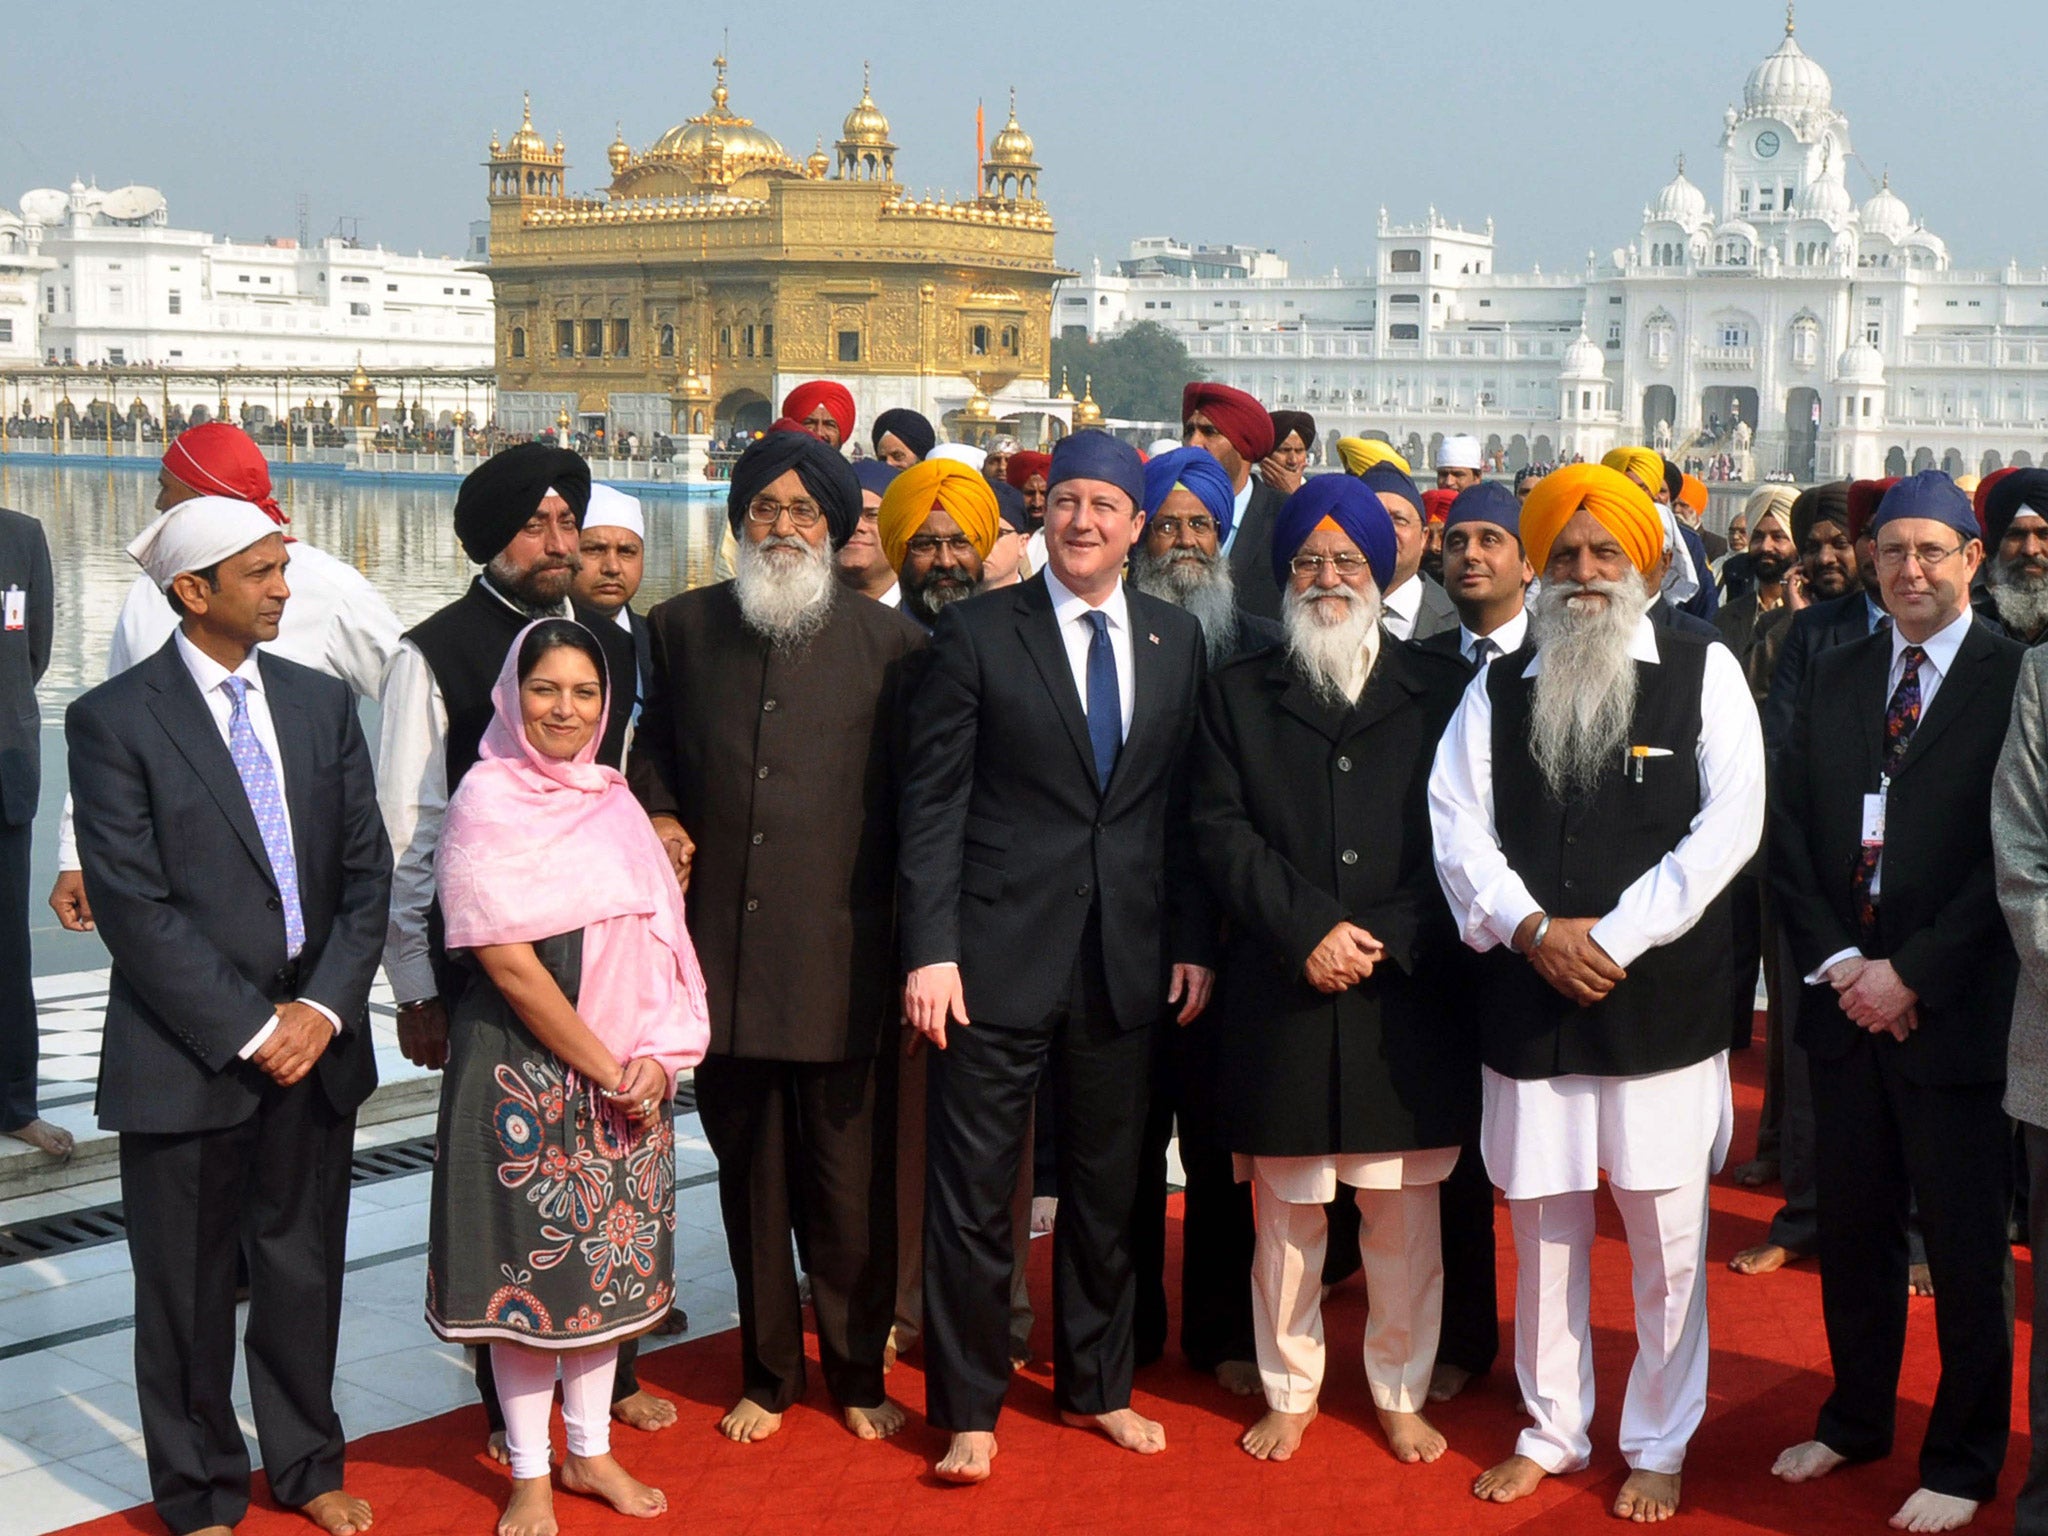 Britain's Prime Minister David Cameron poses inside the premises of the holy Sikh shrine the Golden temple in the northern Indian city of Amritsar